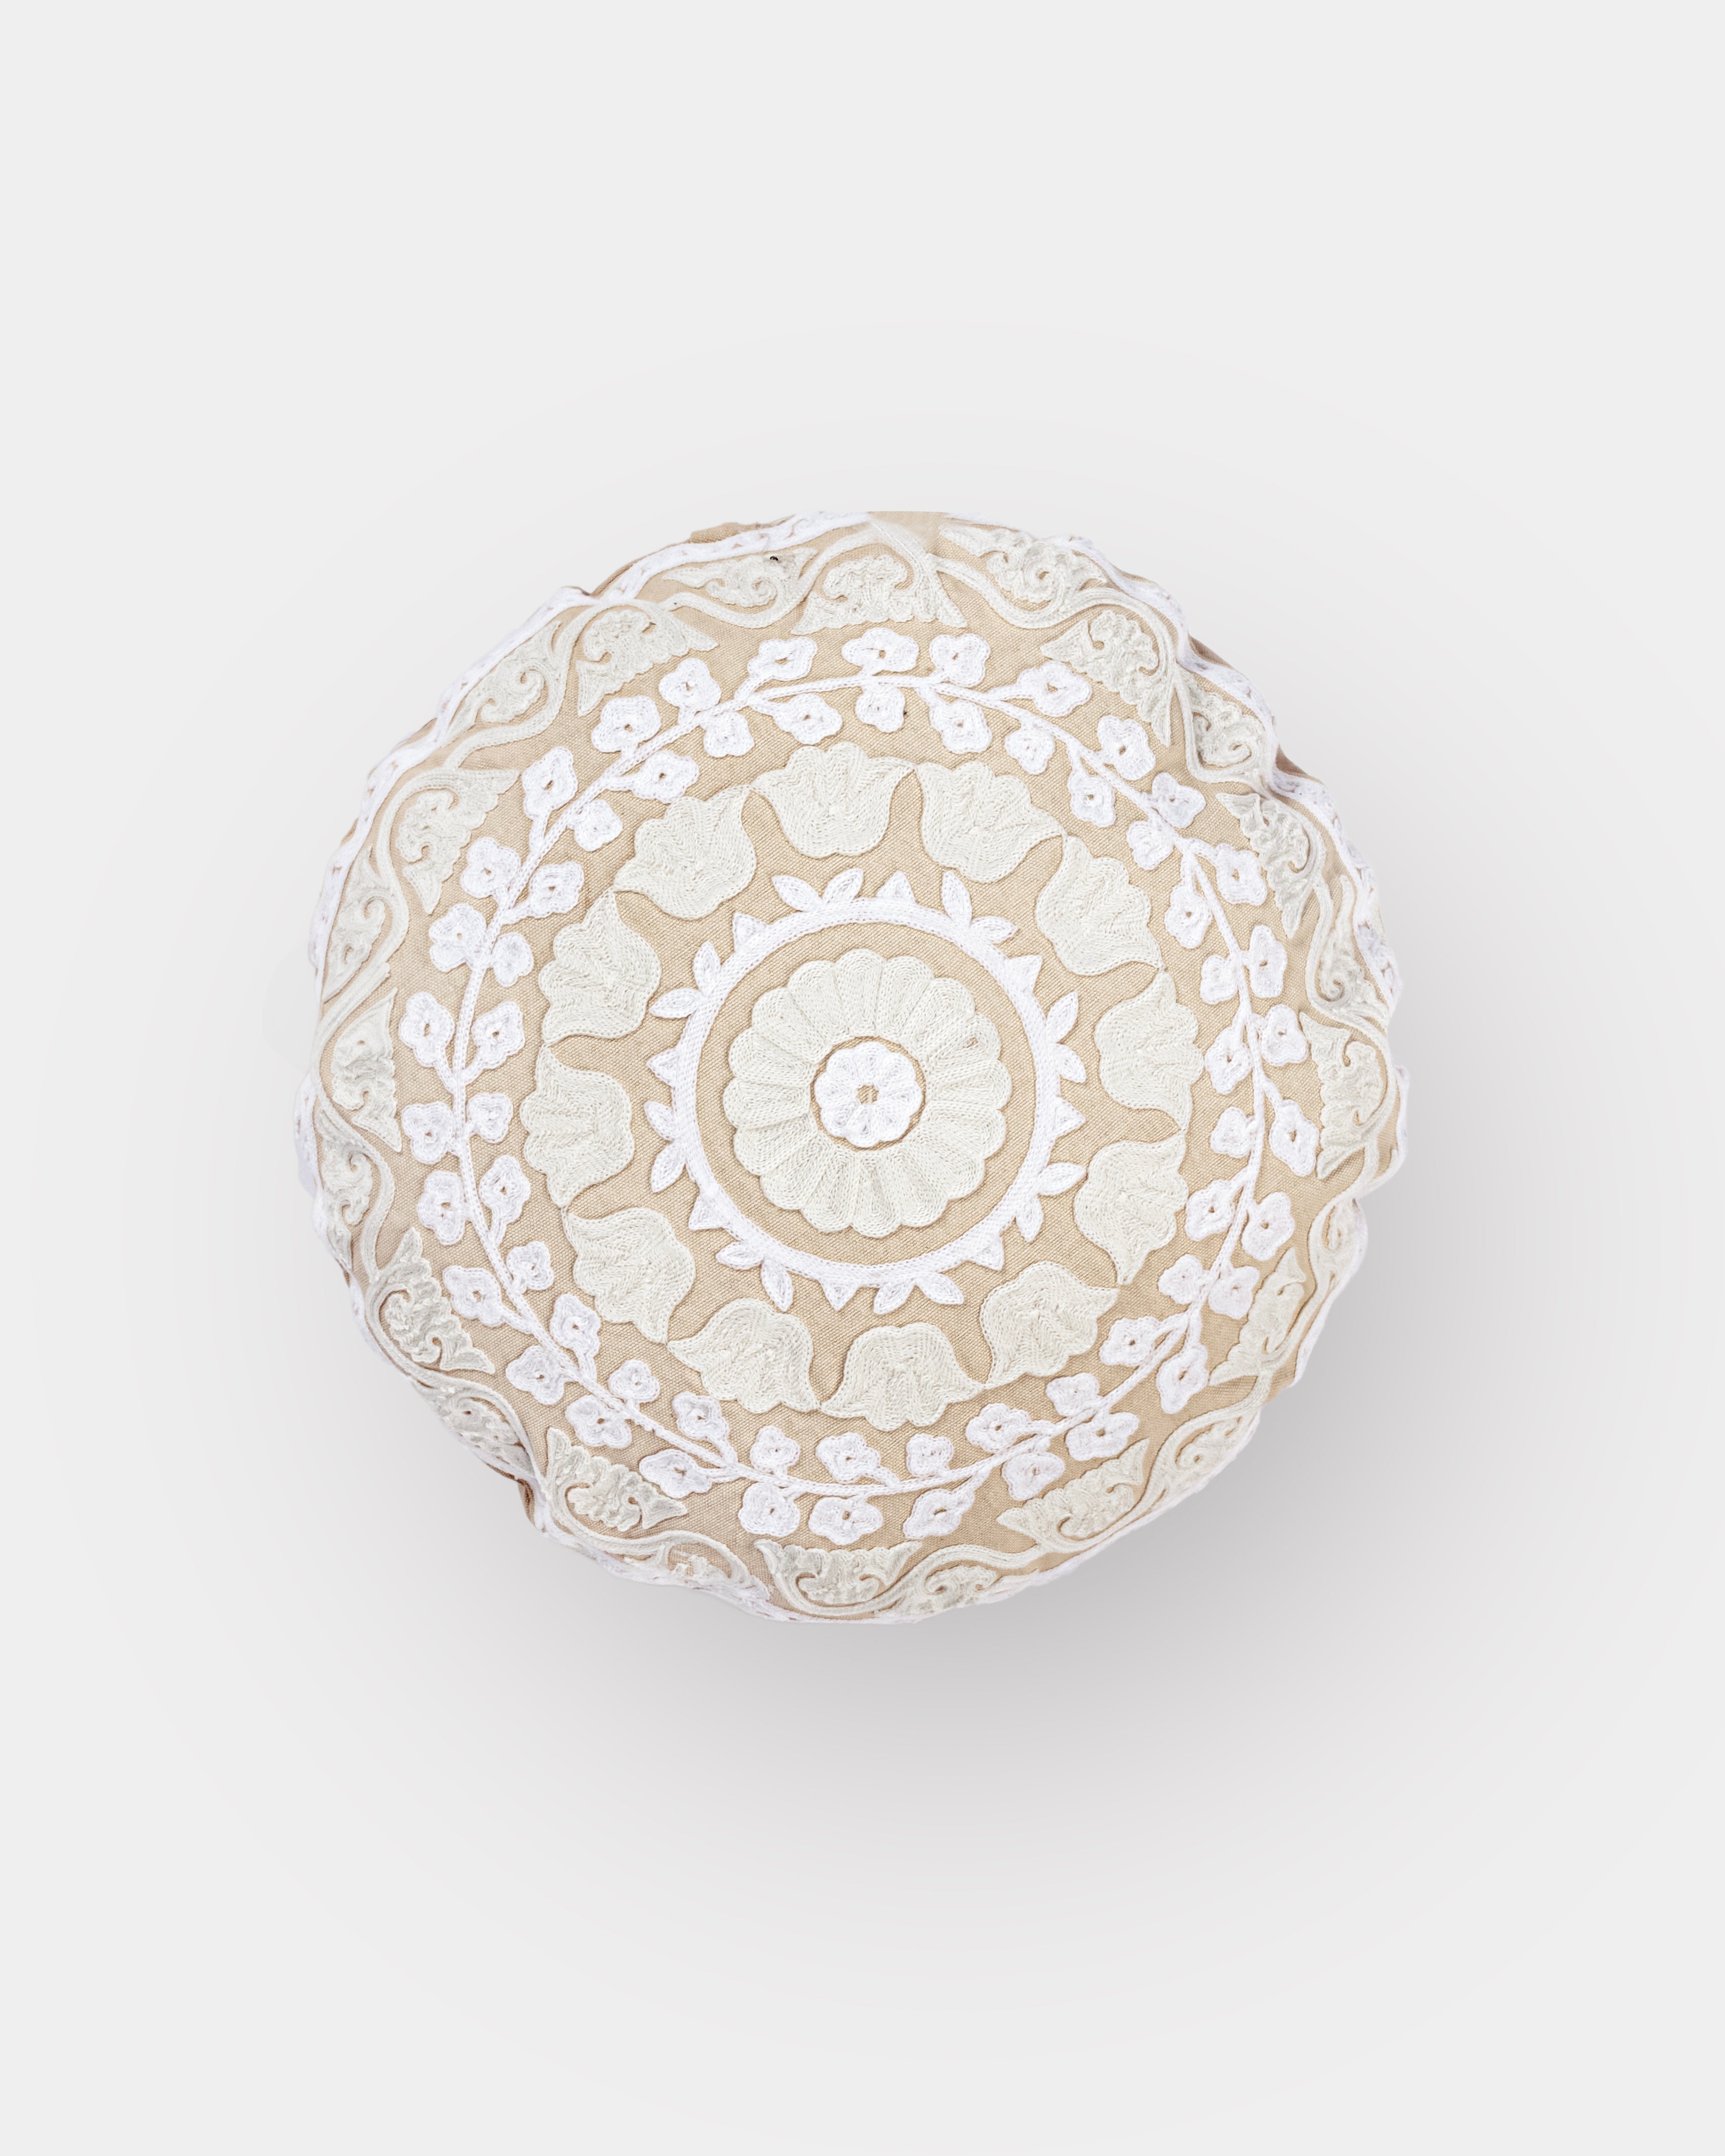 Suzani Pillow | White Pillow Cover Flora 16" Round | Made in Jaipur